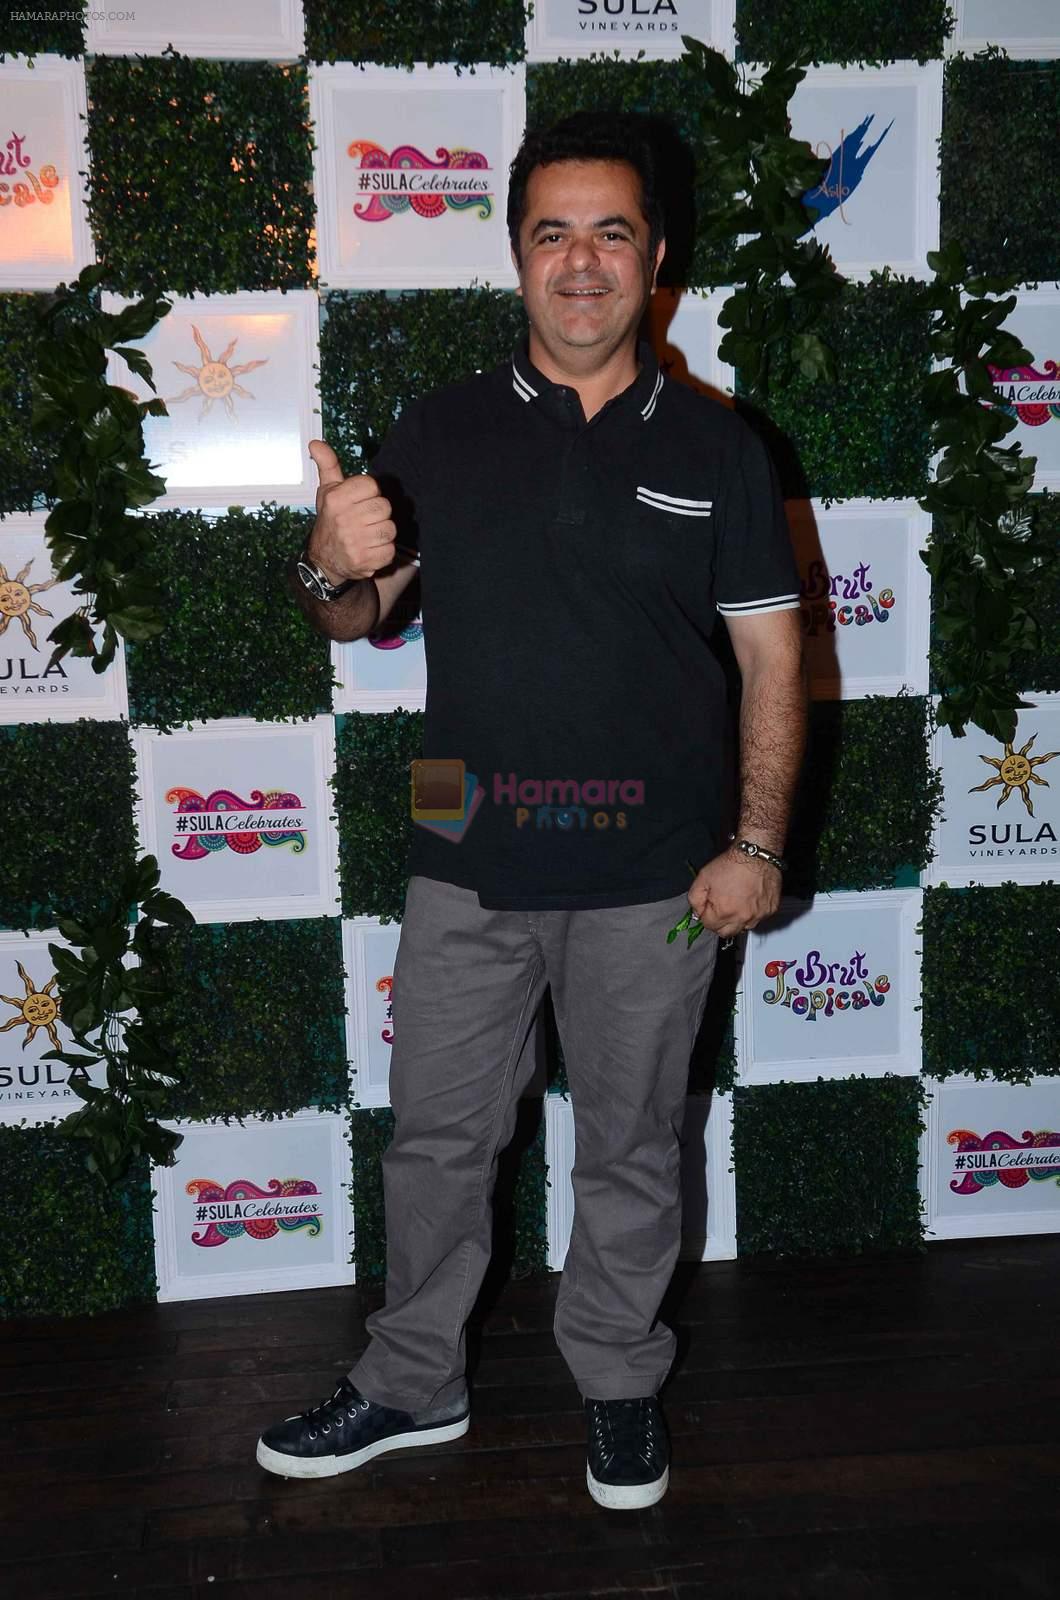 at Sula Wines bash on 25th Oct 2015